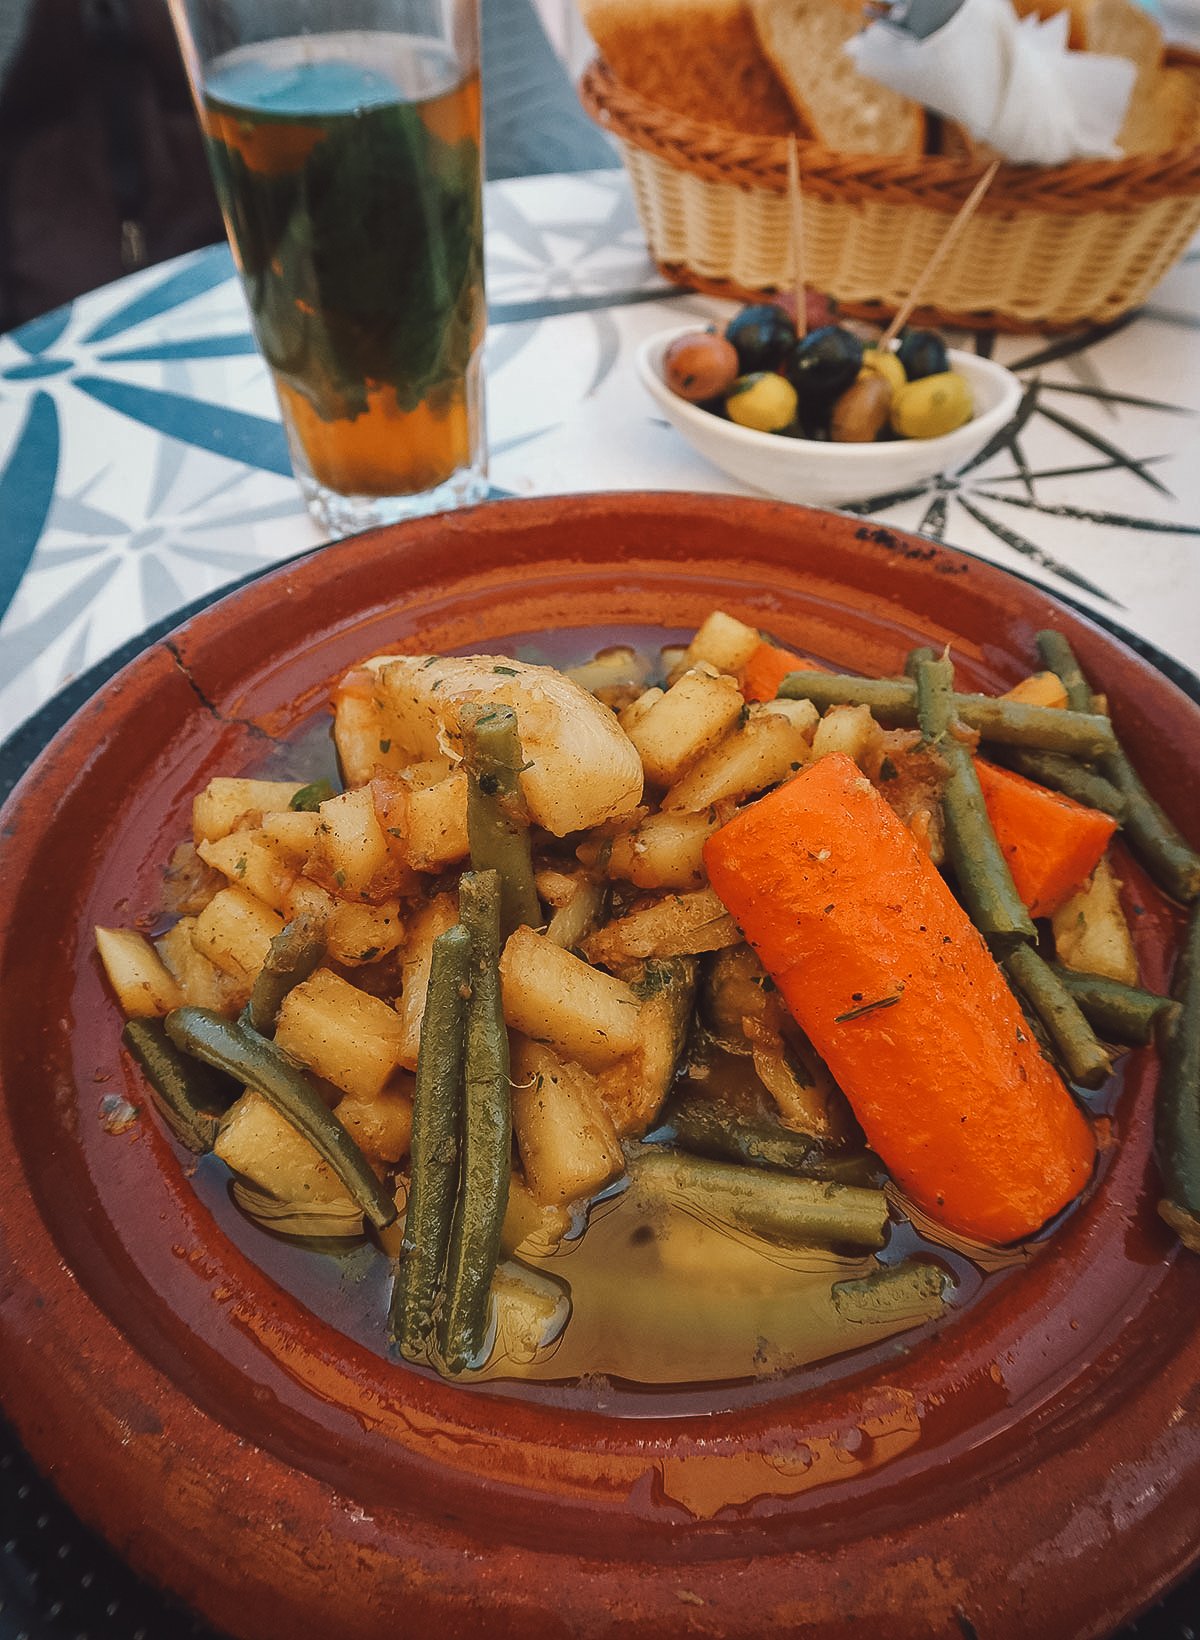 Vegetable tagine at a restaurant in Tangier